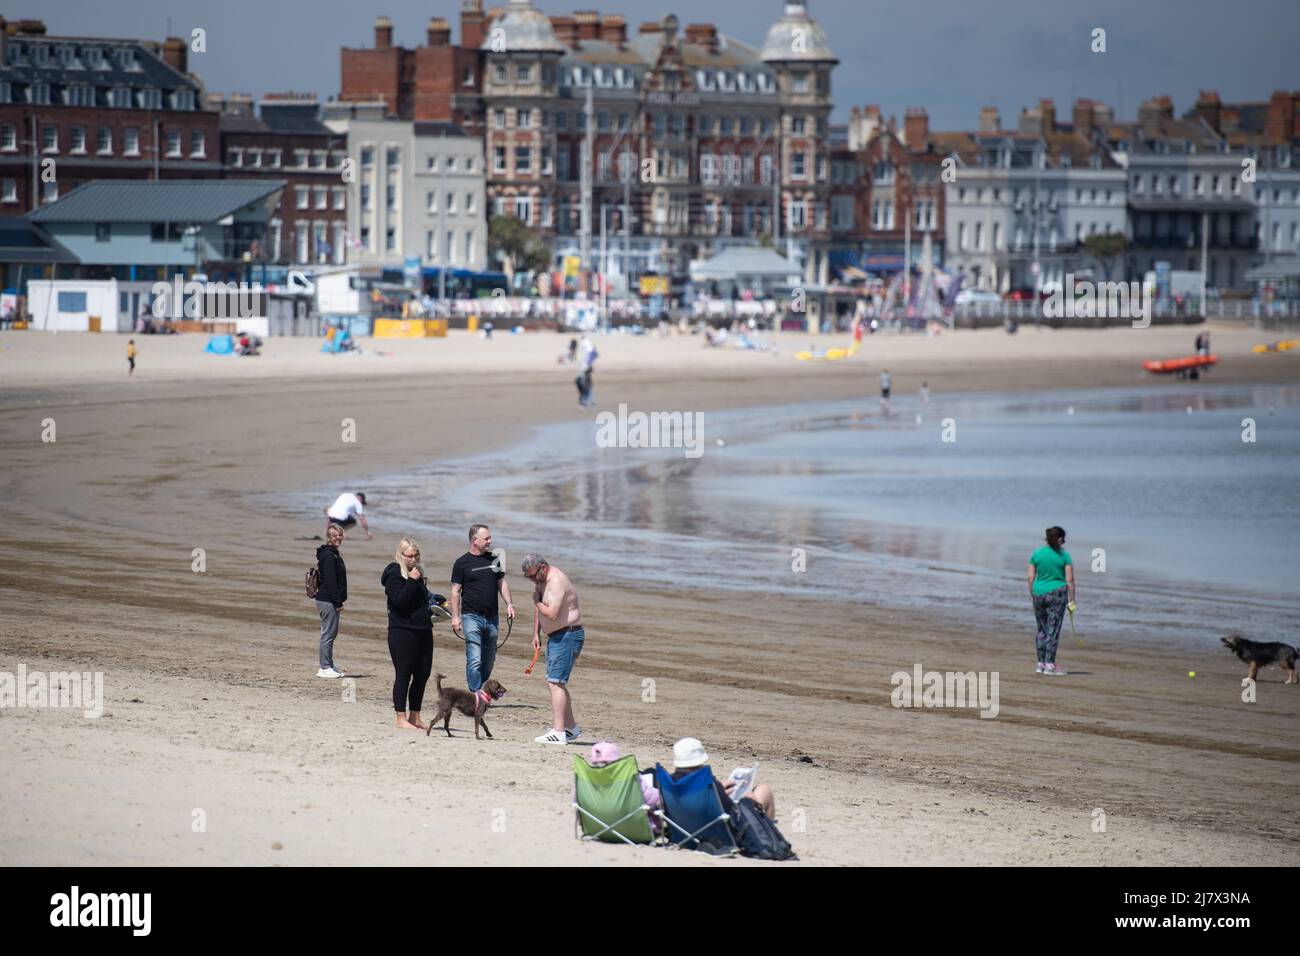 Weymouth, Dorset, UK. 6th May 2022. Day-trippers and holiday makers enjoy the beach at Weymouth in Dorset on one of the hottest days of the year. Stock Photo